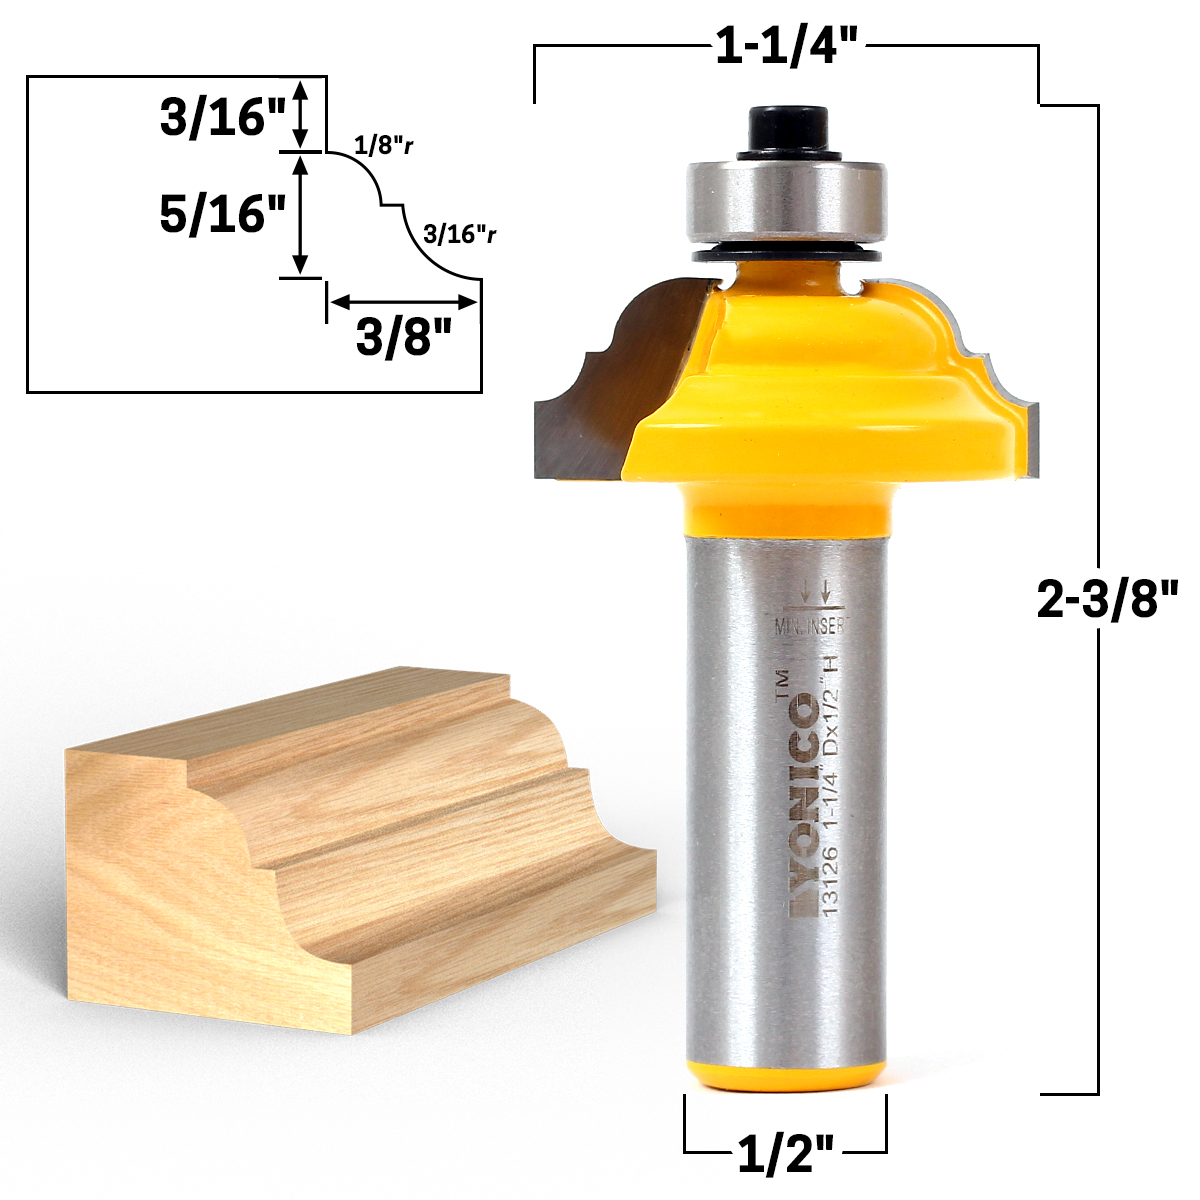 Yonico 13123q Double Roman Ogee Edging Router Bit with Medium 1/4-Inch Shank 